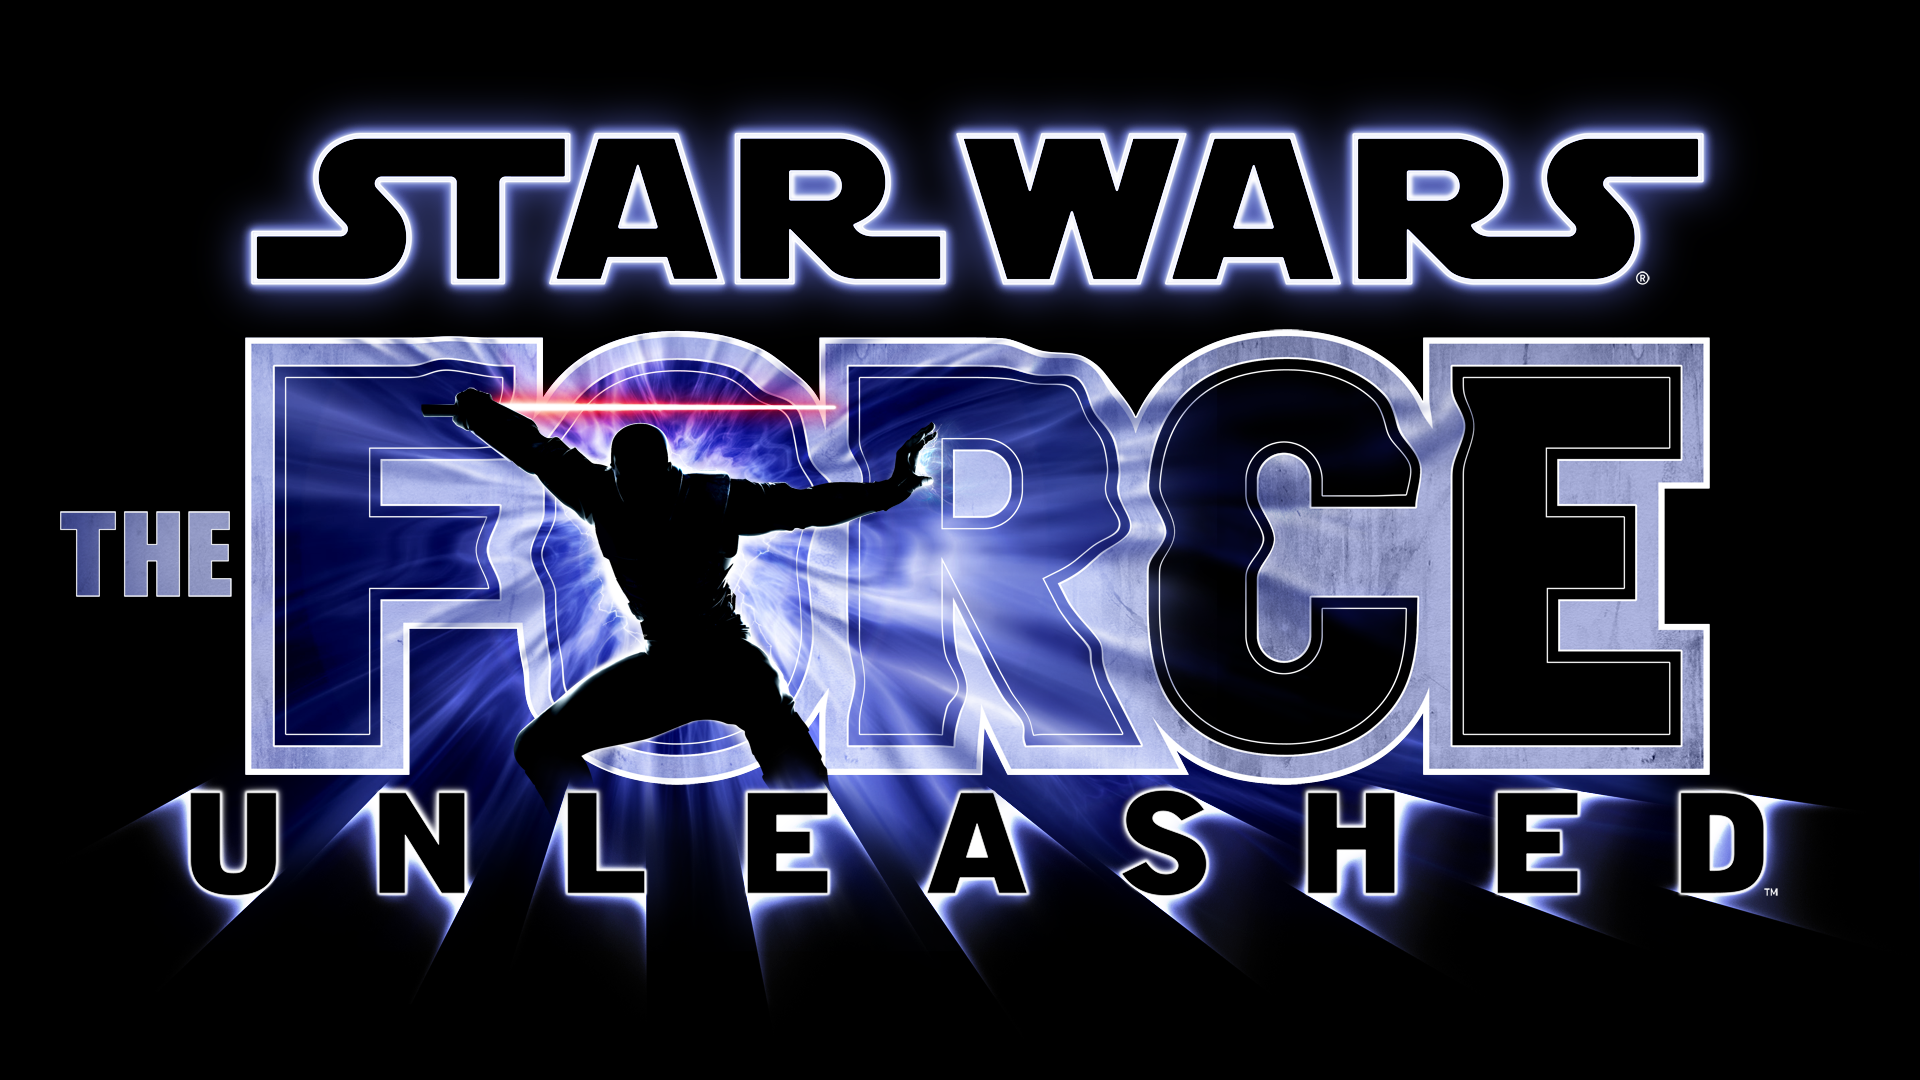 Star Wars: The Force Unleashed #21